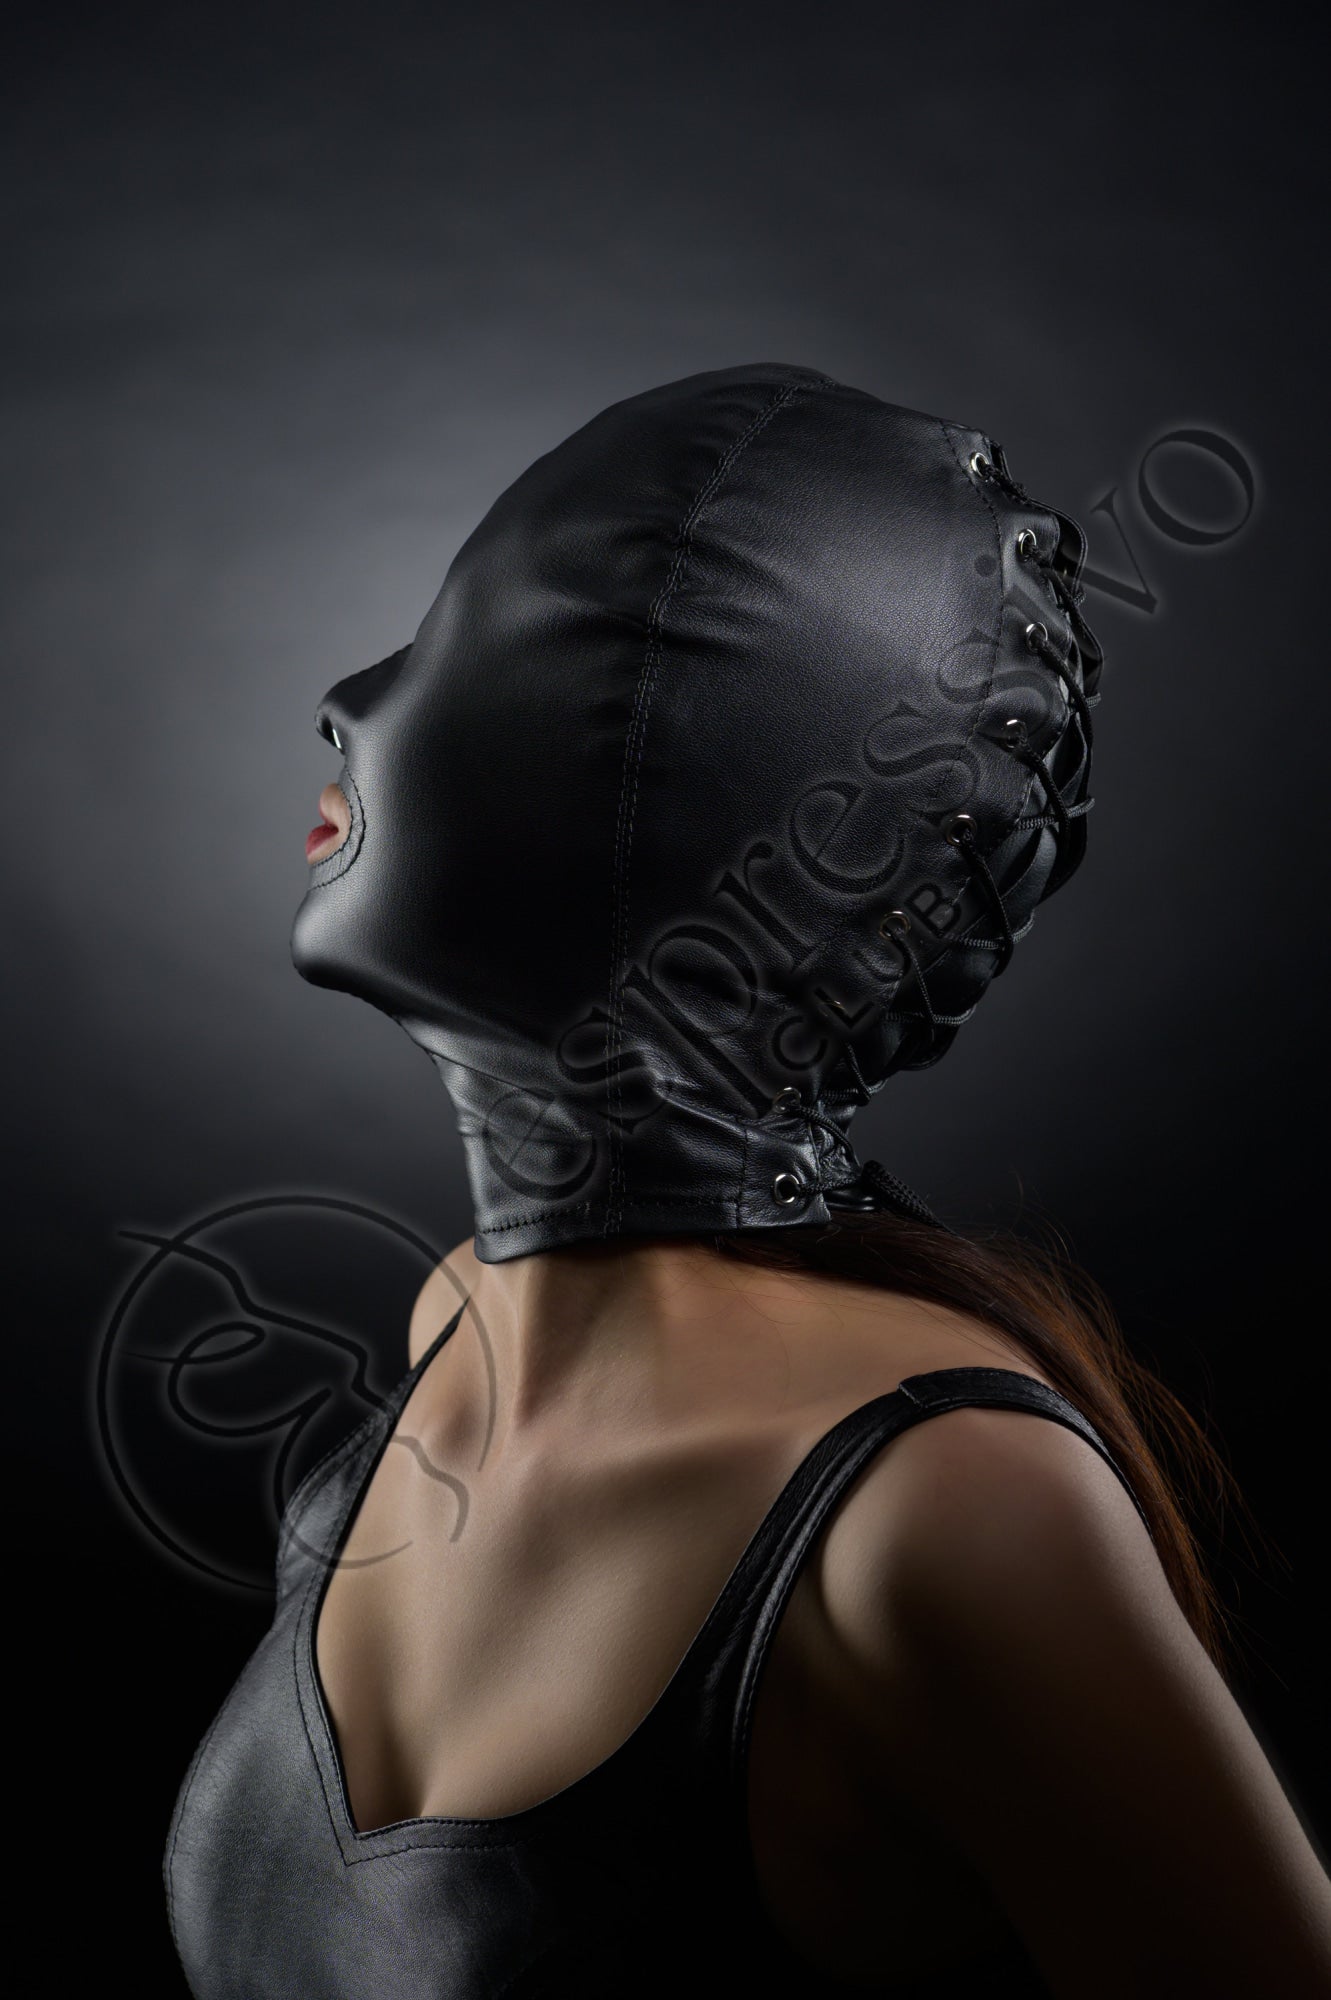 Open Mouth Cocksucker Real Leather Hood For Extreme Bondage Sex Masks Real